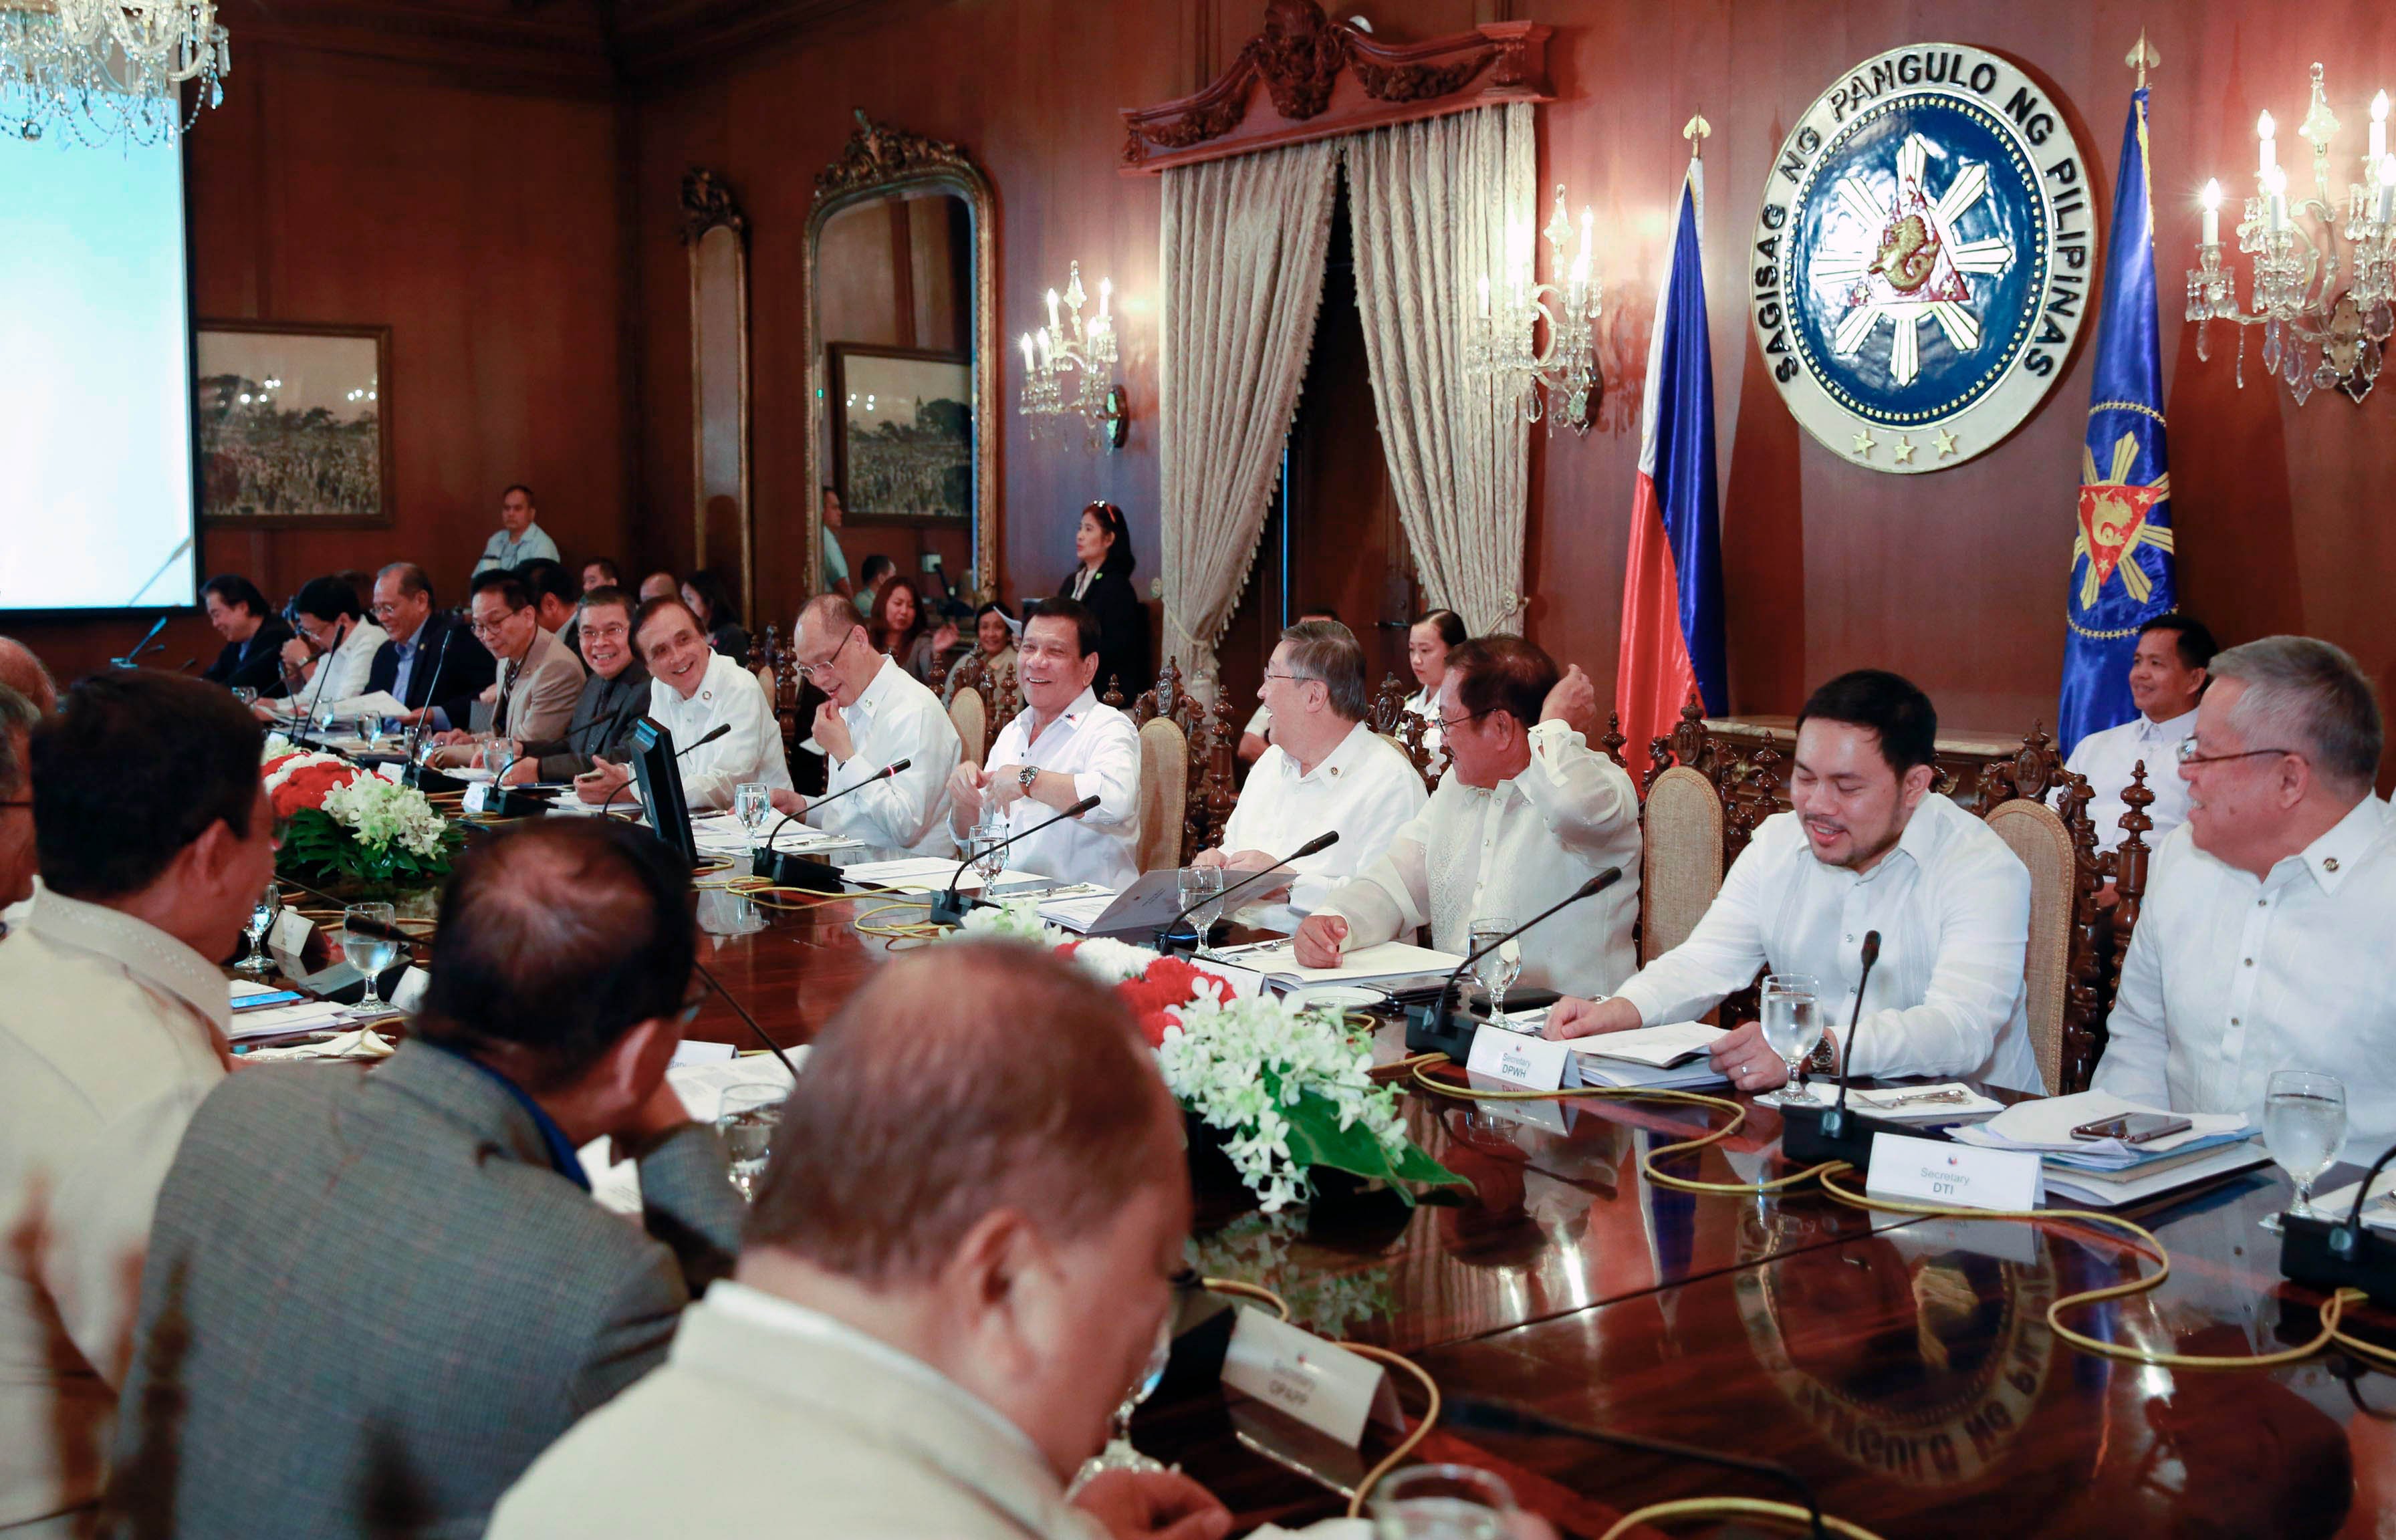 Pres. Duterte presides over 13th Cabinet meeting at Malacañan Palace